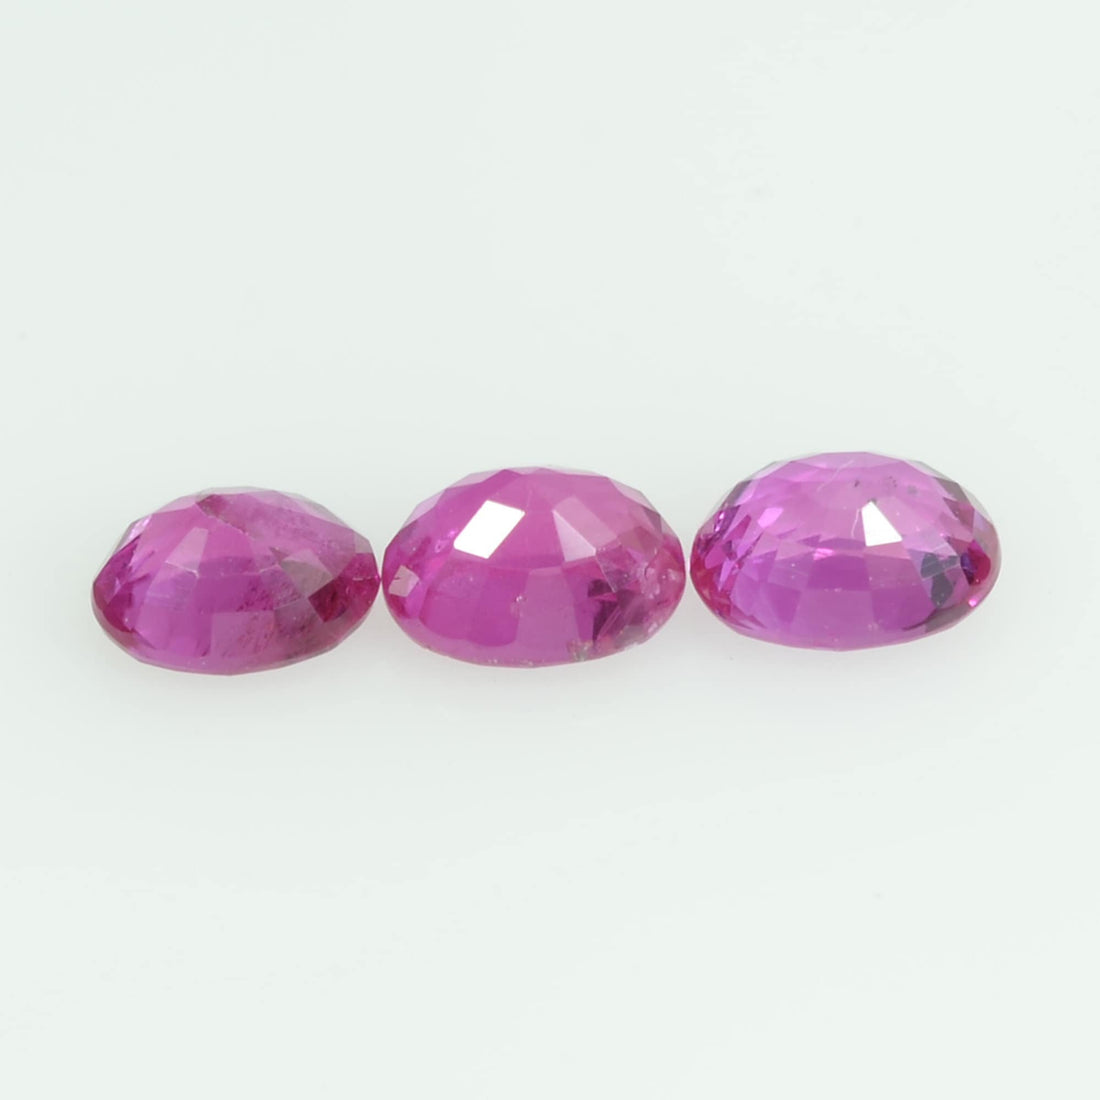 4.5x3.5 mm Natural Pink Sapphire Loose Gemstone oval Cut